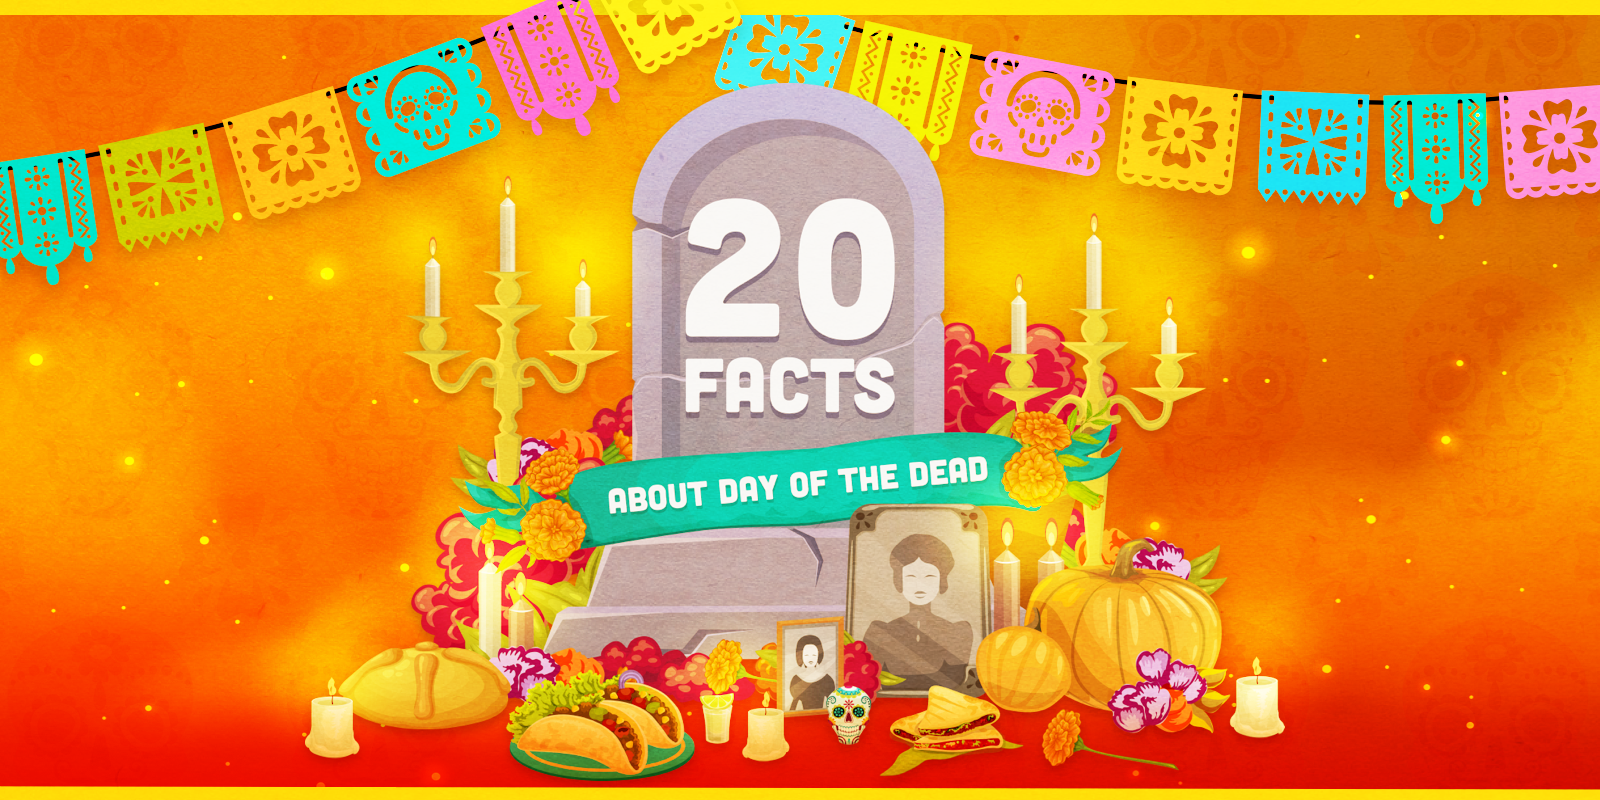 Travel blog: Infographic: 20 Boneshaking Facts About Day Of The Dead We Bet You Didn’t Know